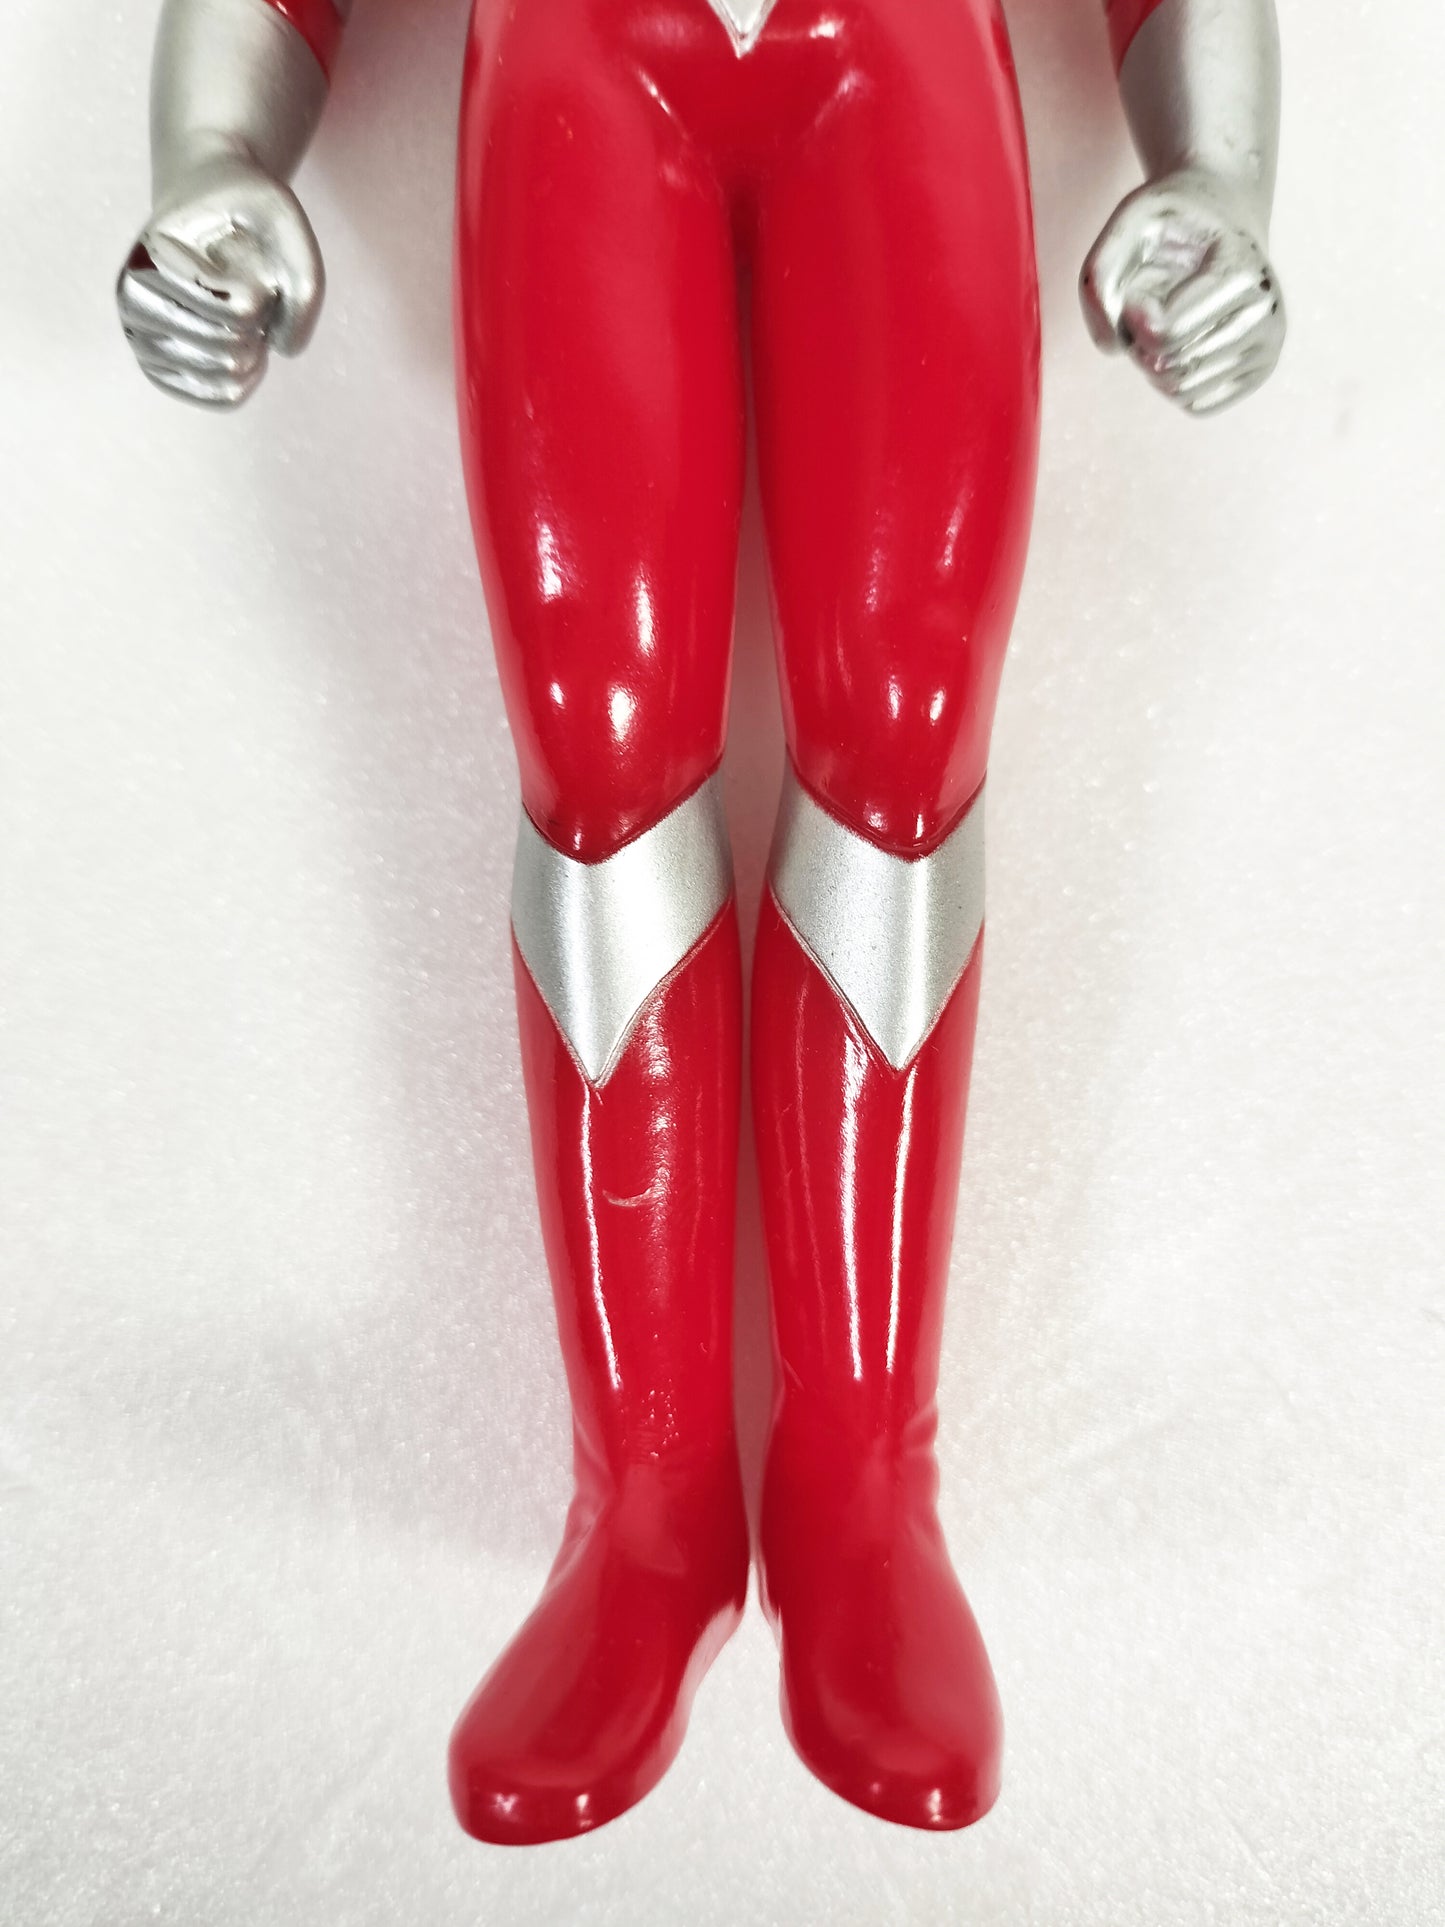 Ultraman Zearth Made in Japan Height about 16.5cm Sofvi Figure retro vintage major scratches and dirt